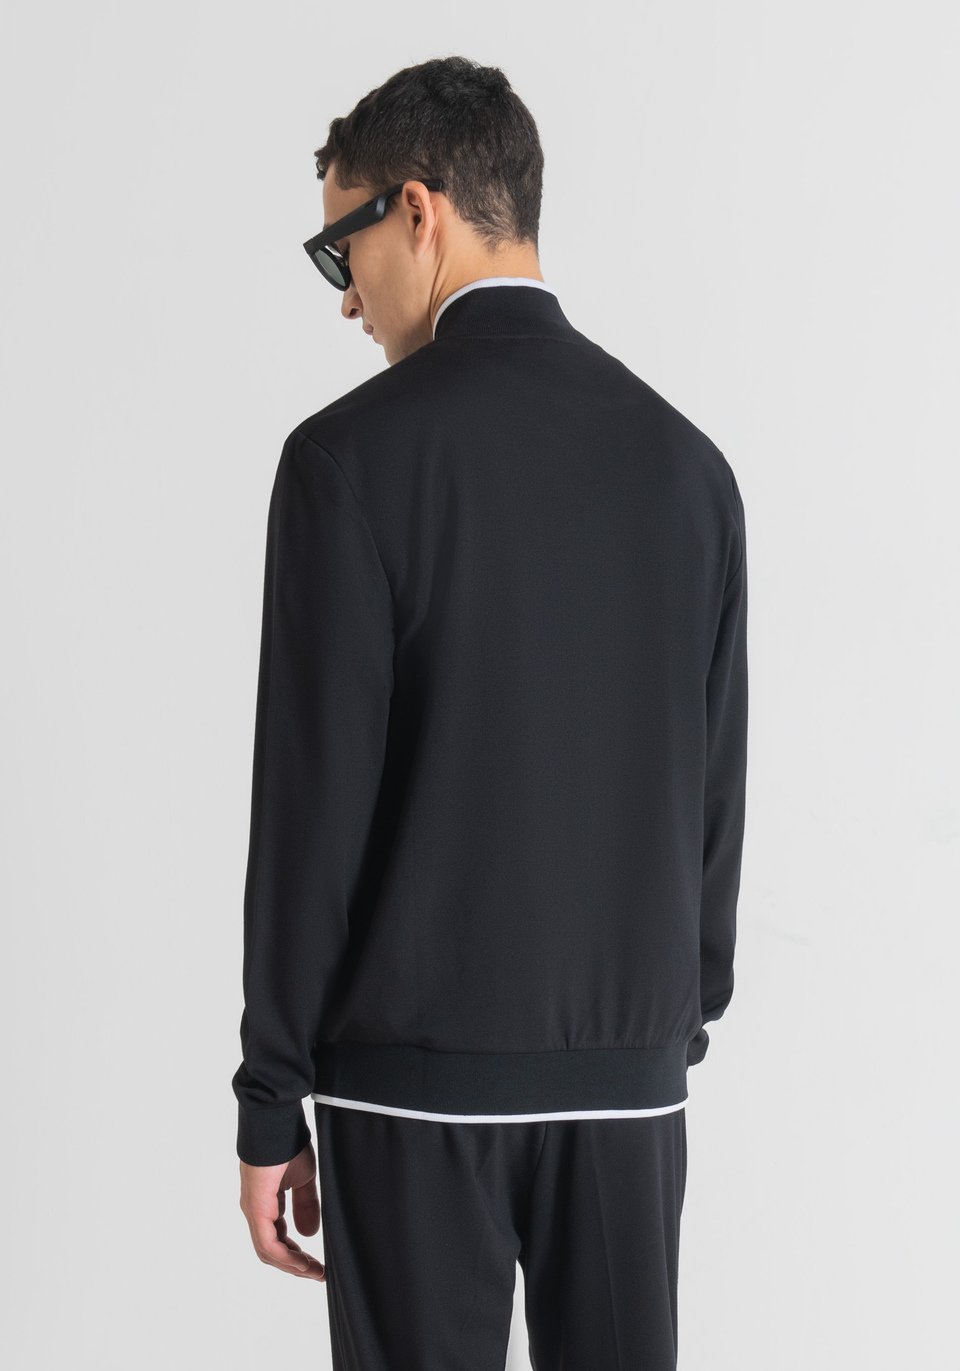 SLIM FIT SWEATSHIRT IN SCUBA BLEND WITH ZIP AND PATCH WITH RUBBERISED LOGO - Antony Morato Online Shop